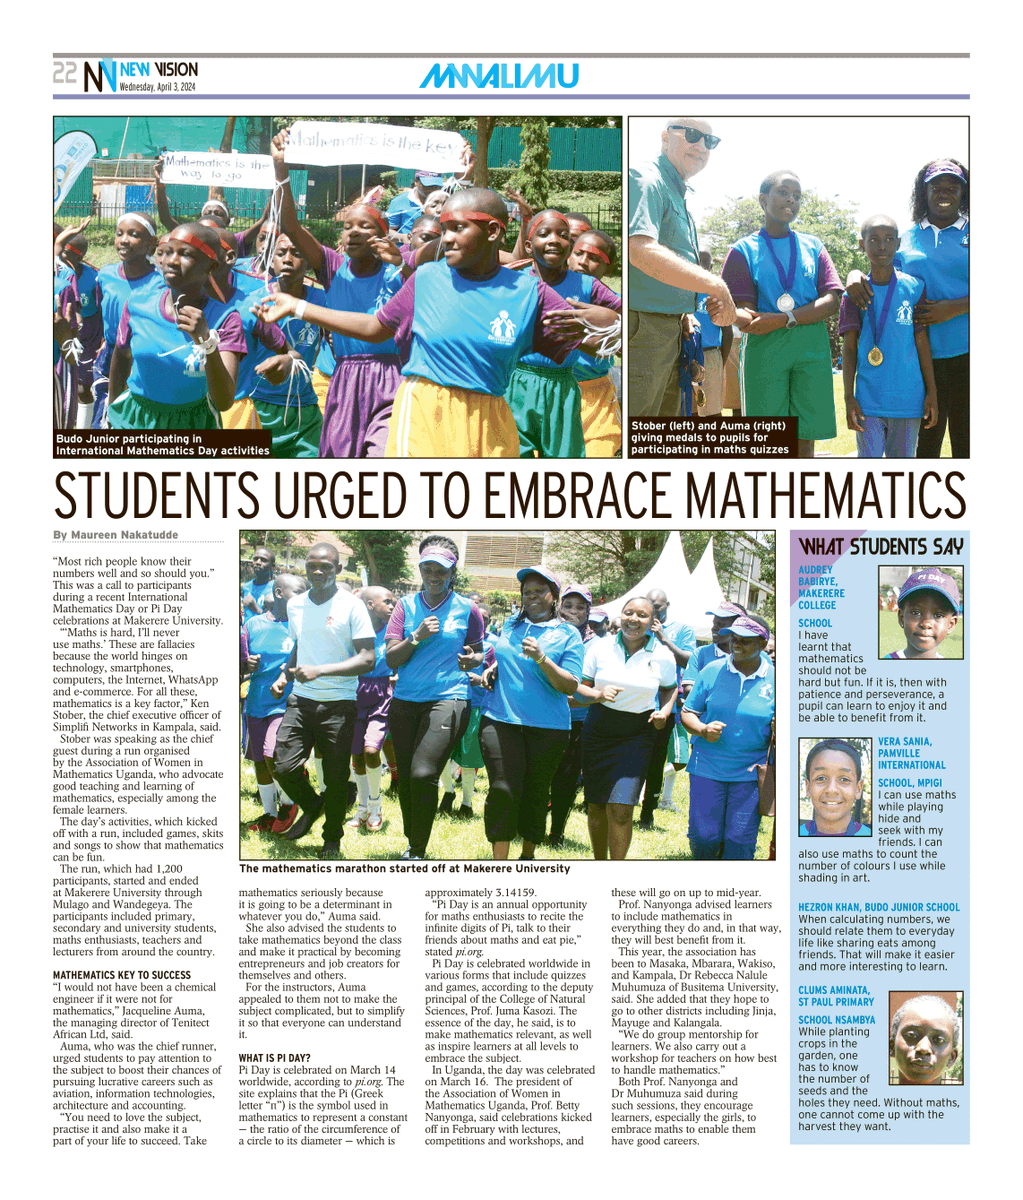 Our CEO, Ken Stober interacts with Buddo Junior students, encouraging them to appreciate math and stay in school. newvision.co.ug/category/educa… 📸 @NakatuddeMaureen